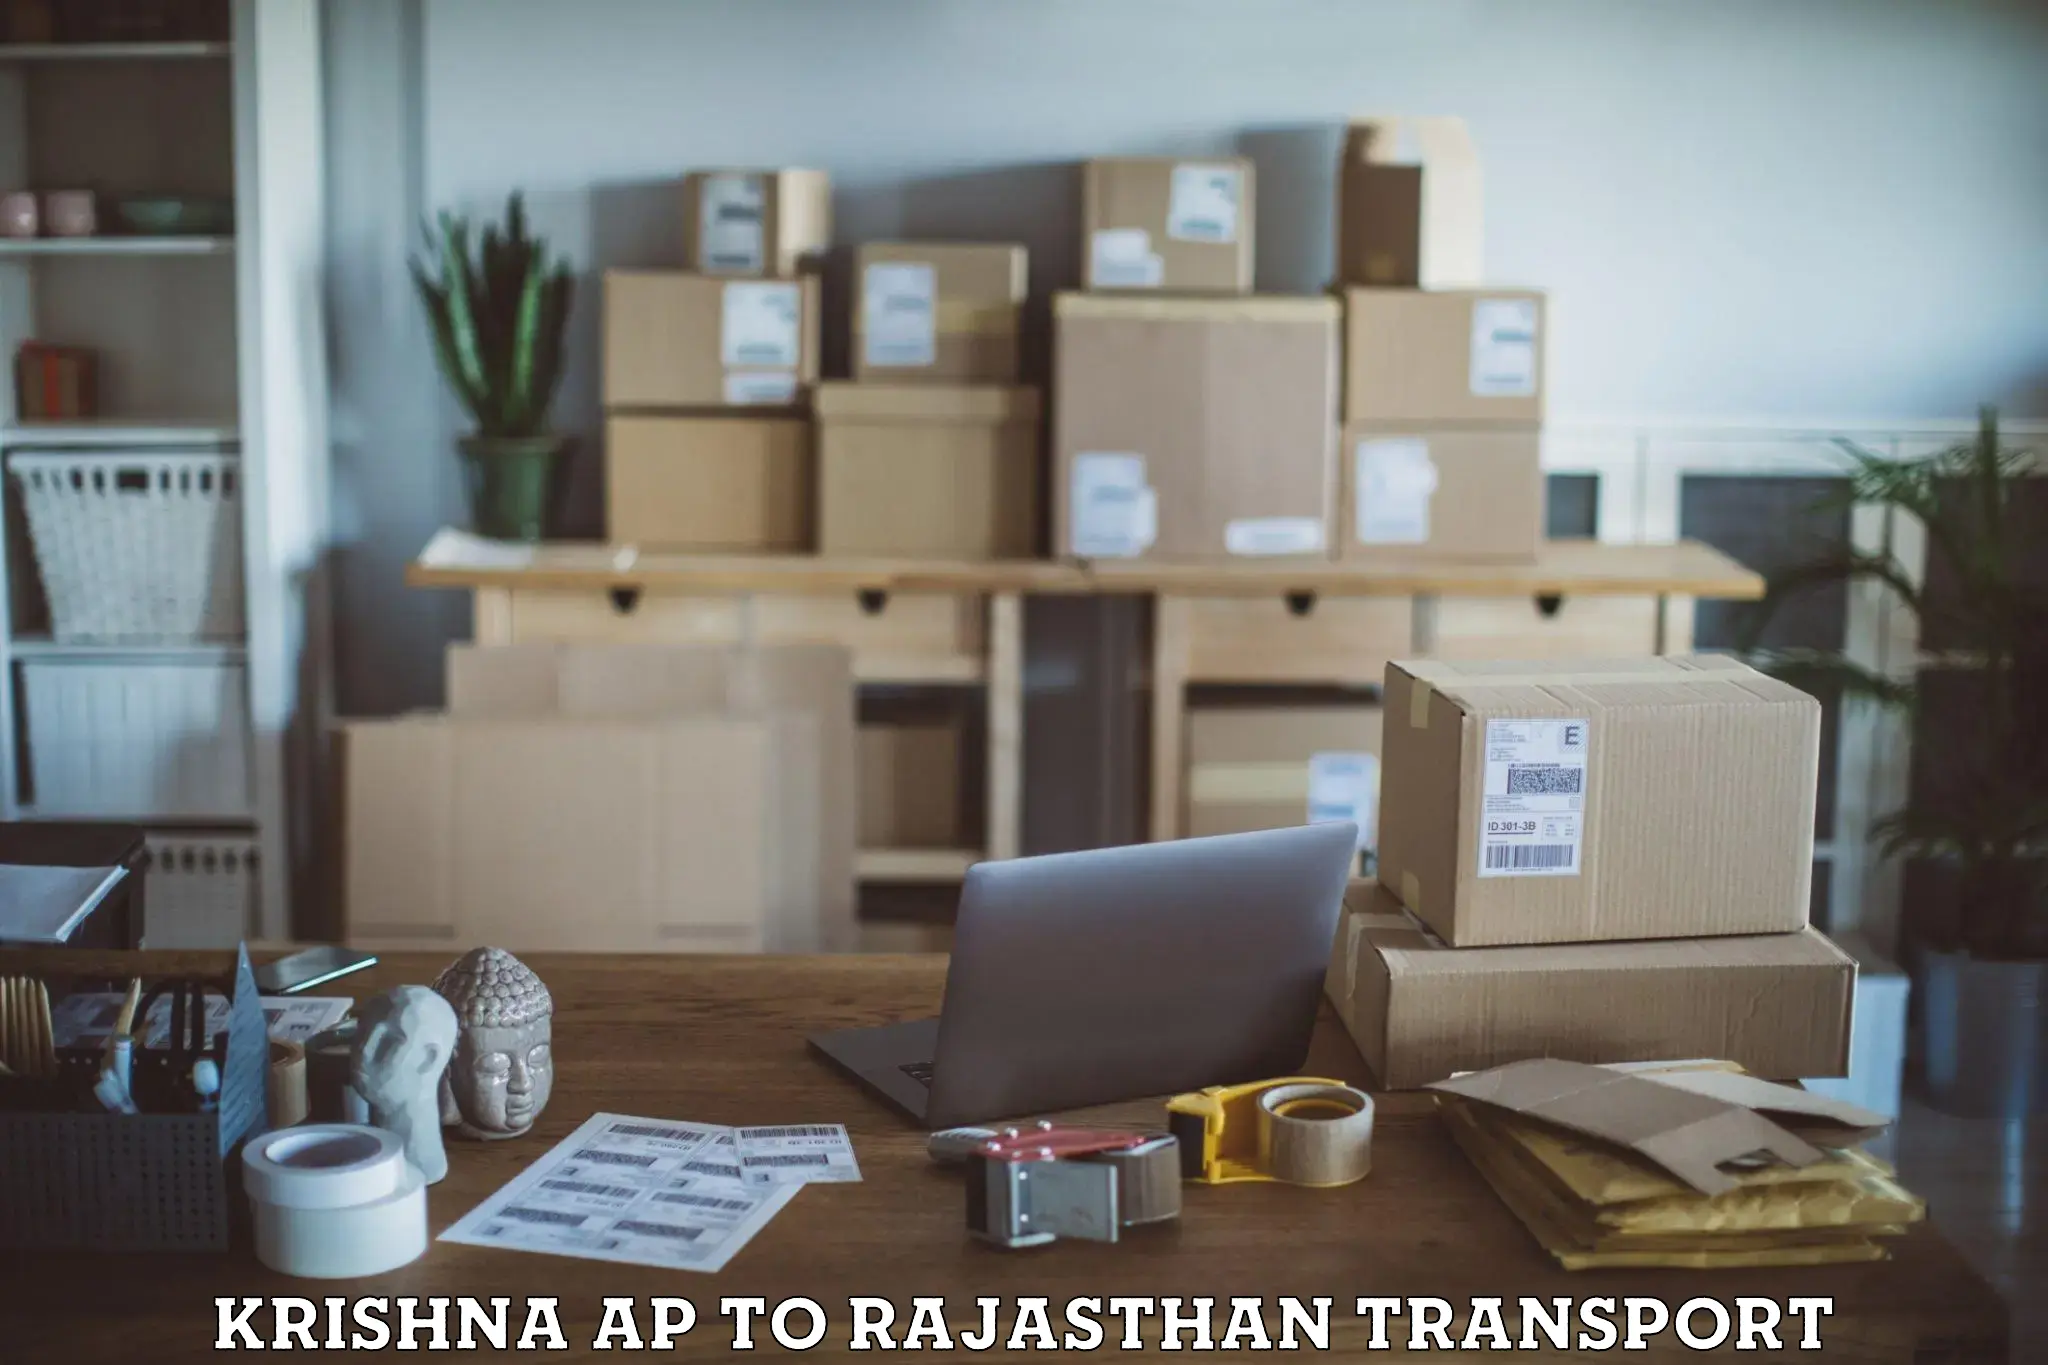 Container transport service Krishna AP to Rajasthan